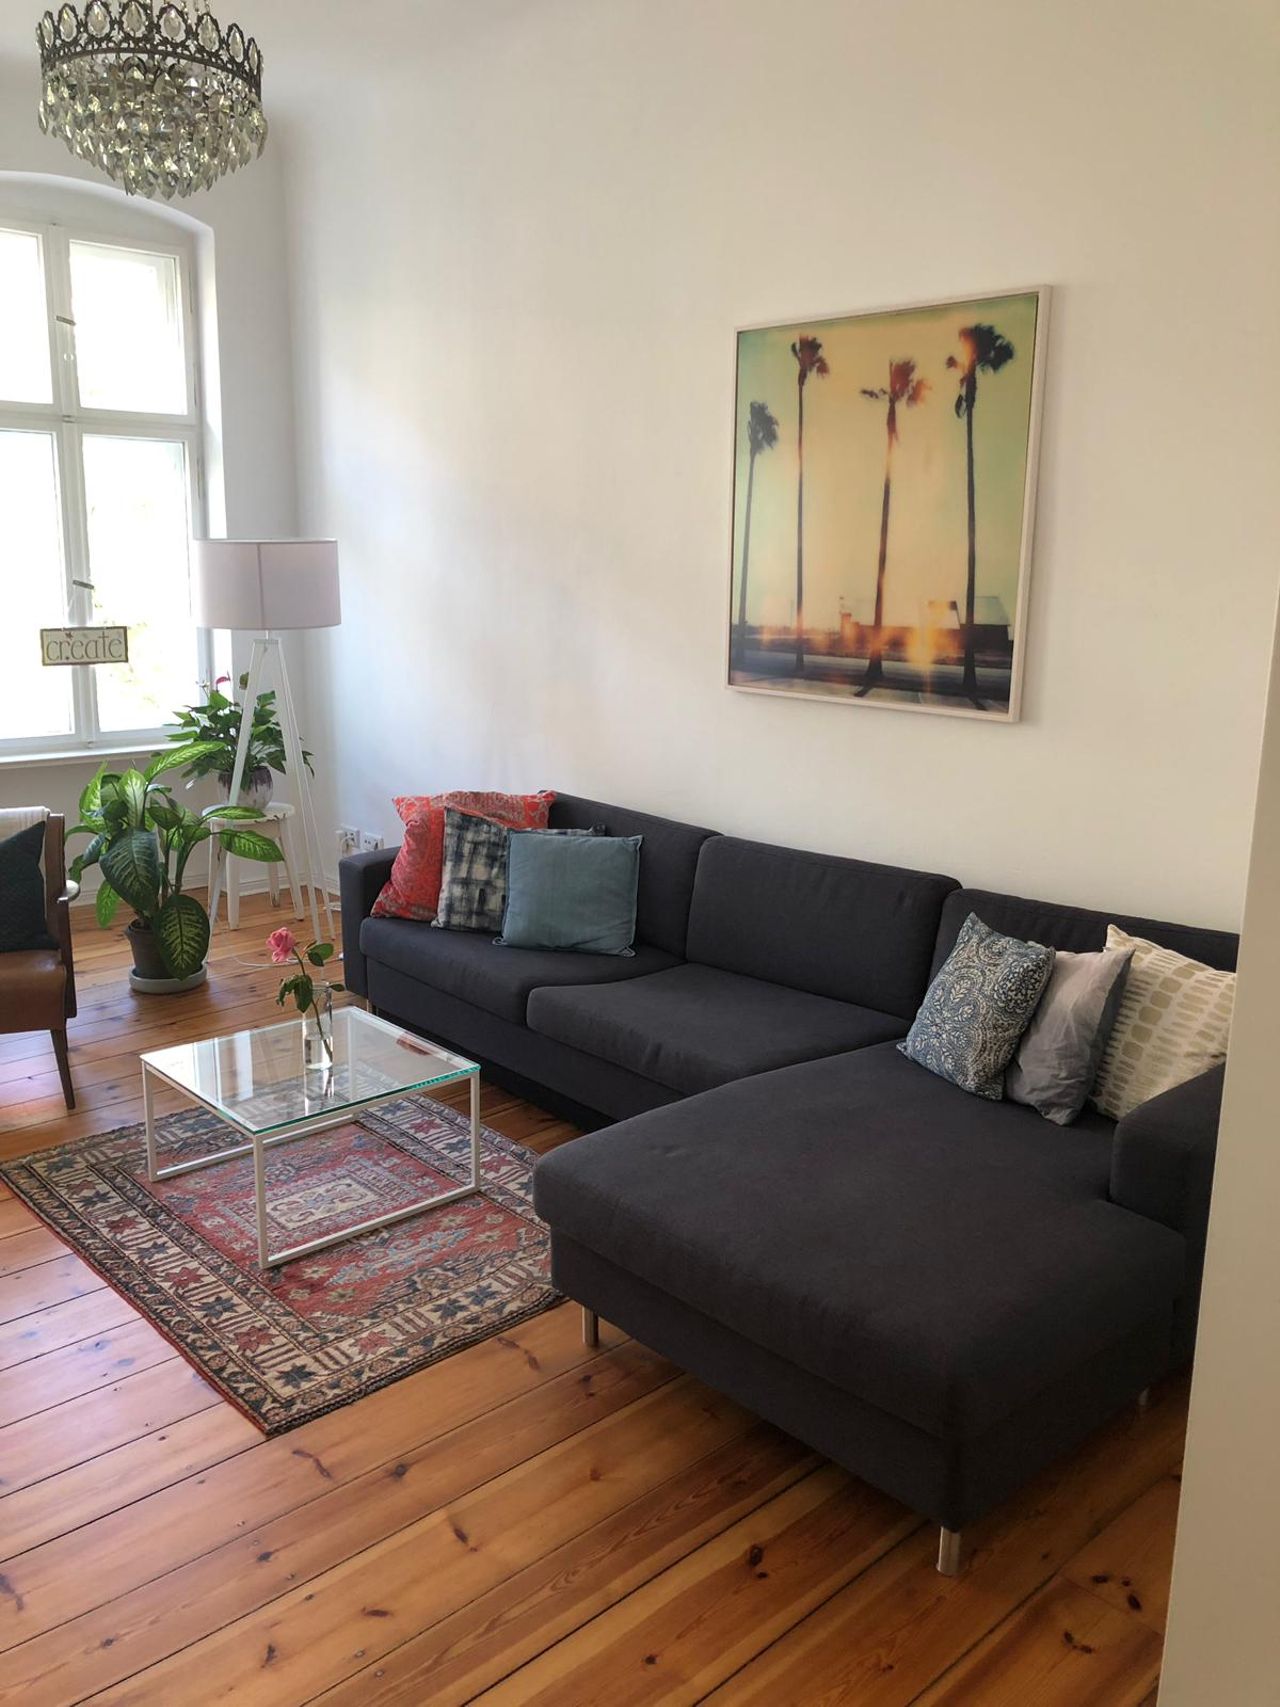 Charming 2,5 Room Designer Apartment in Beautiful Prenzlauer Berg with a Balcony